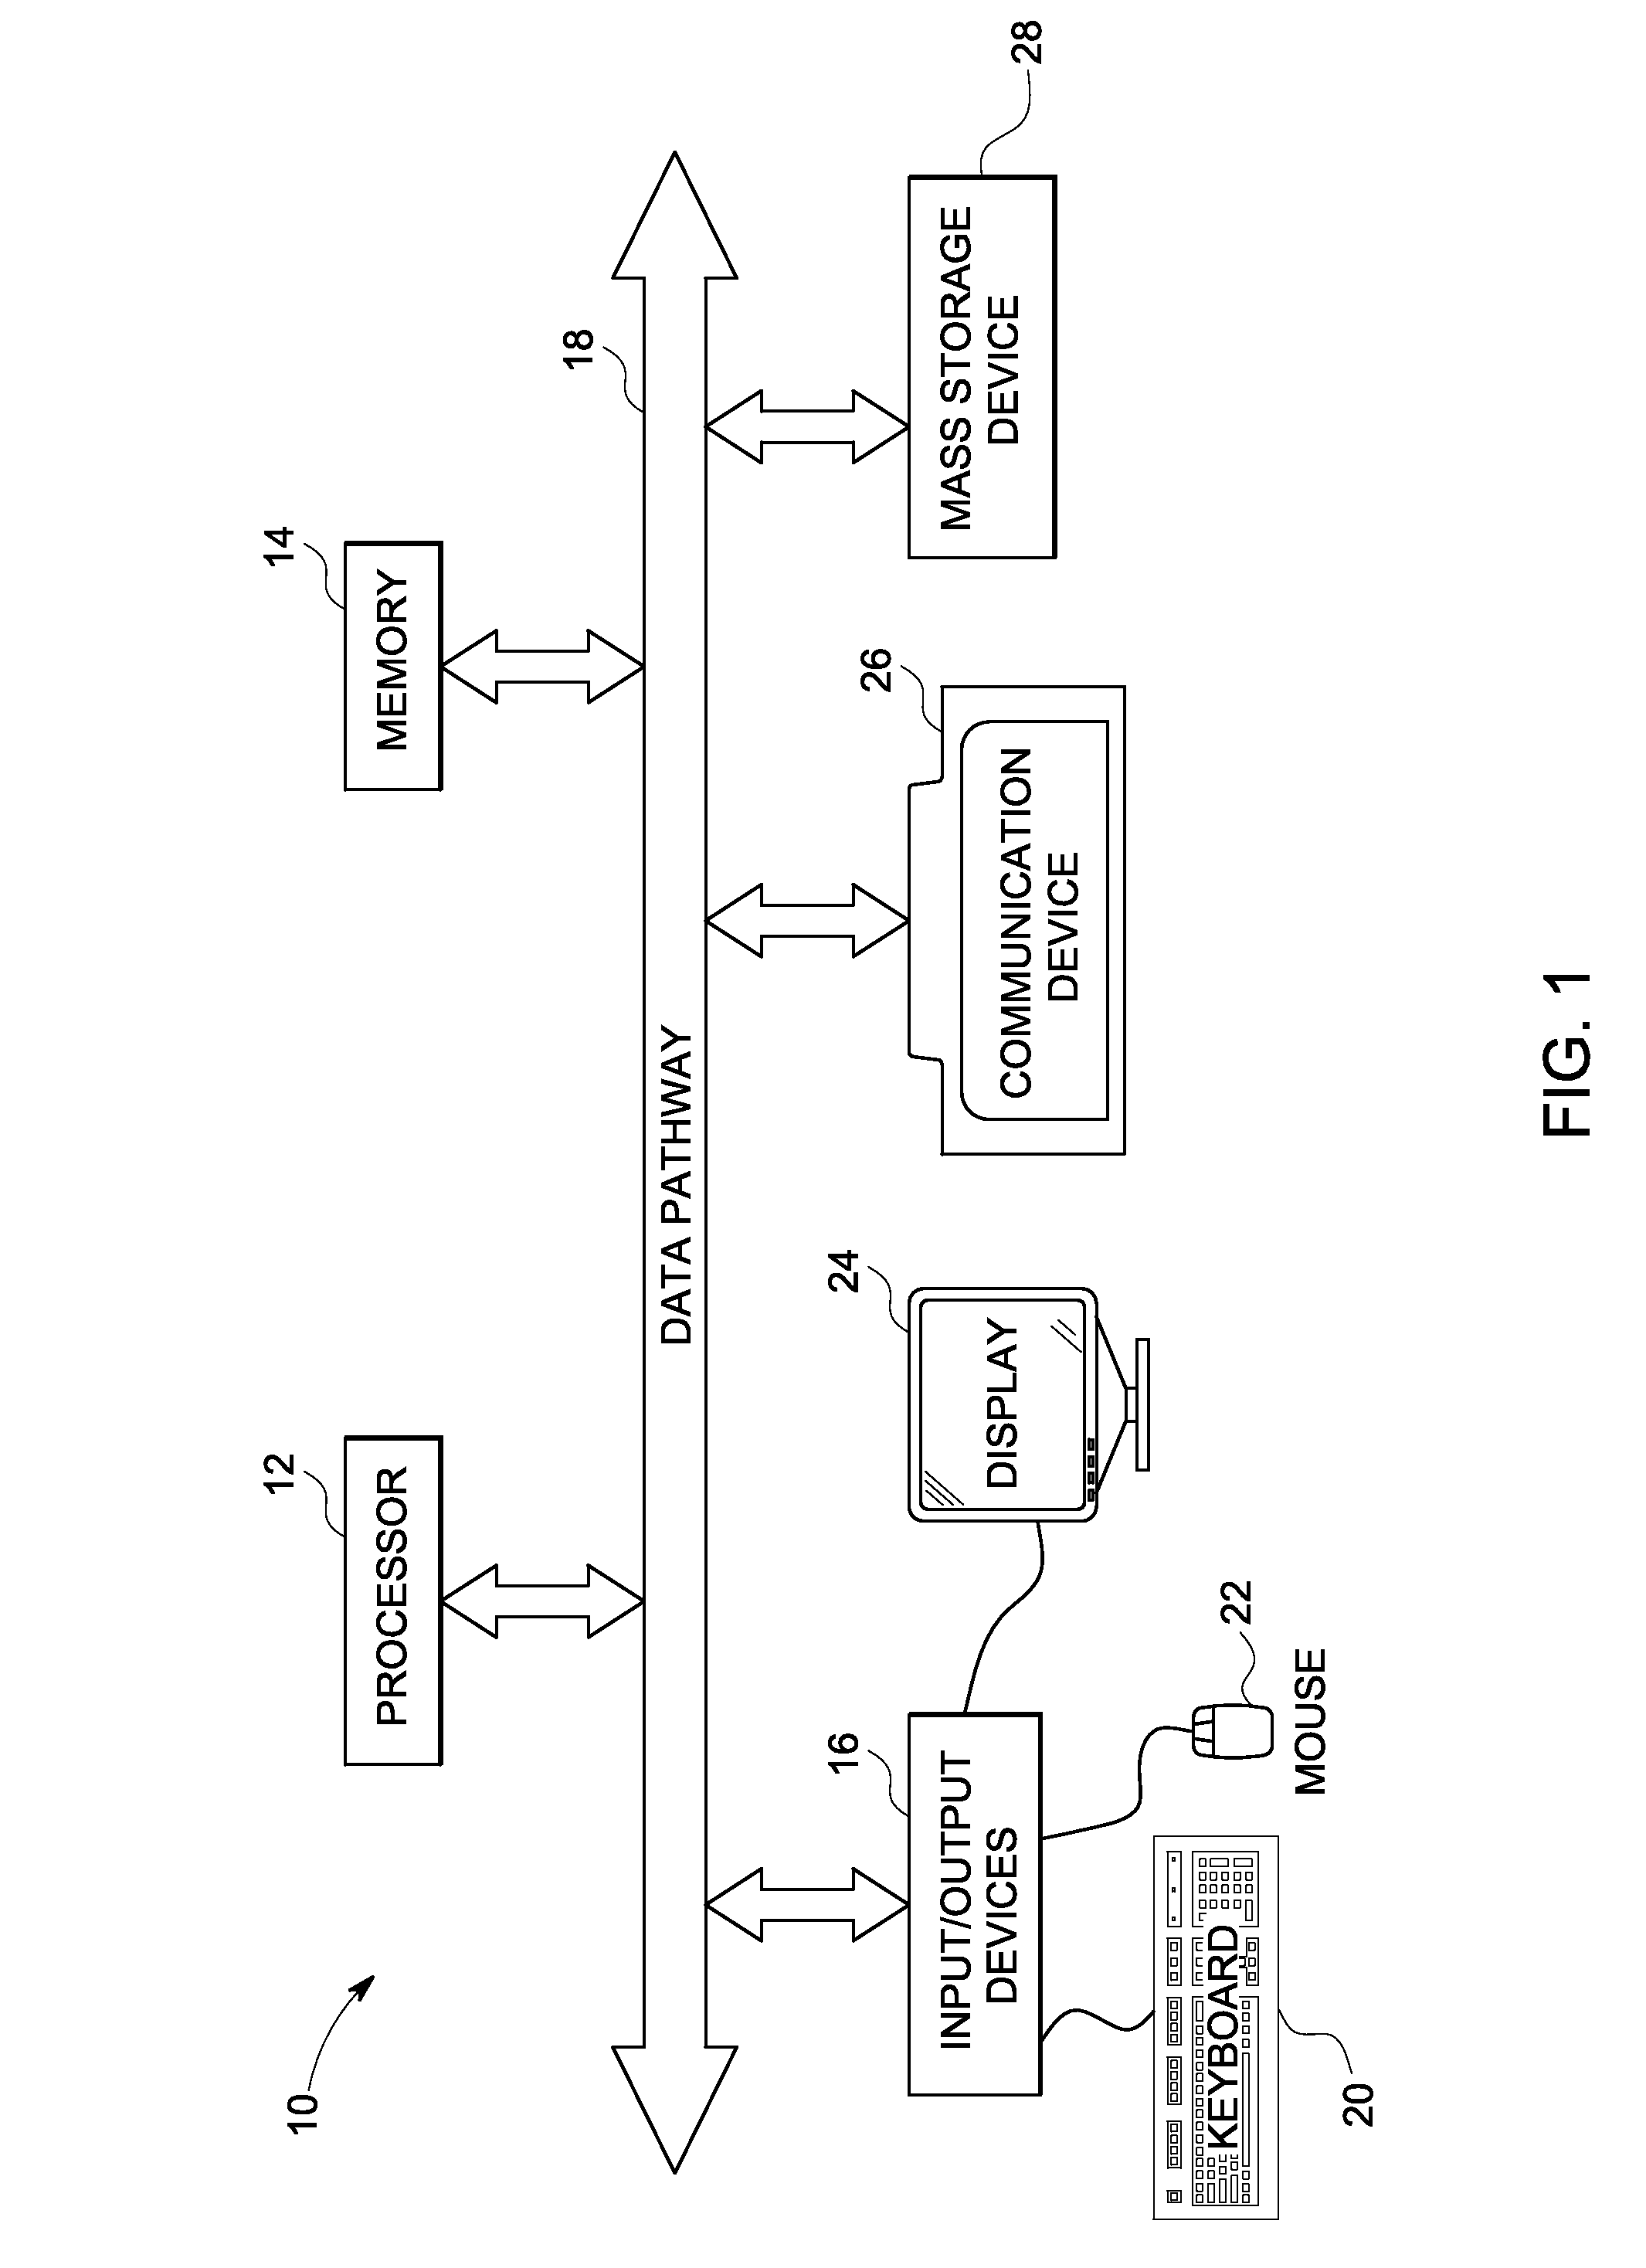 System for cost-sensitive autonomous information retrieval and extraction